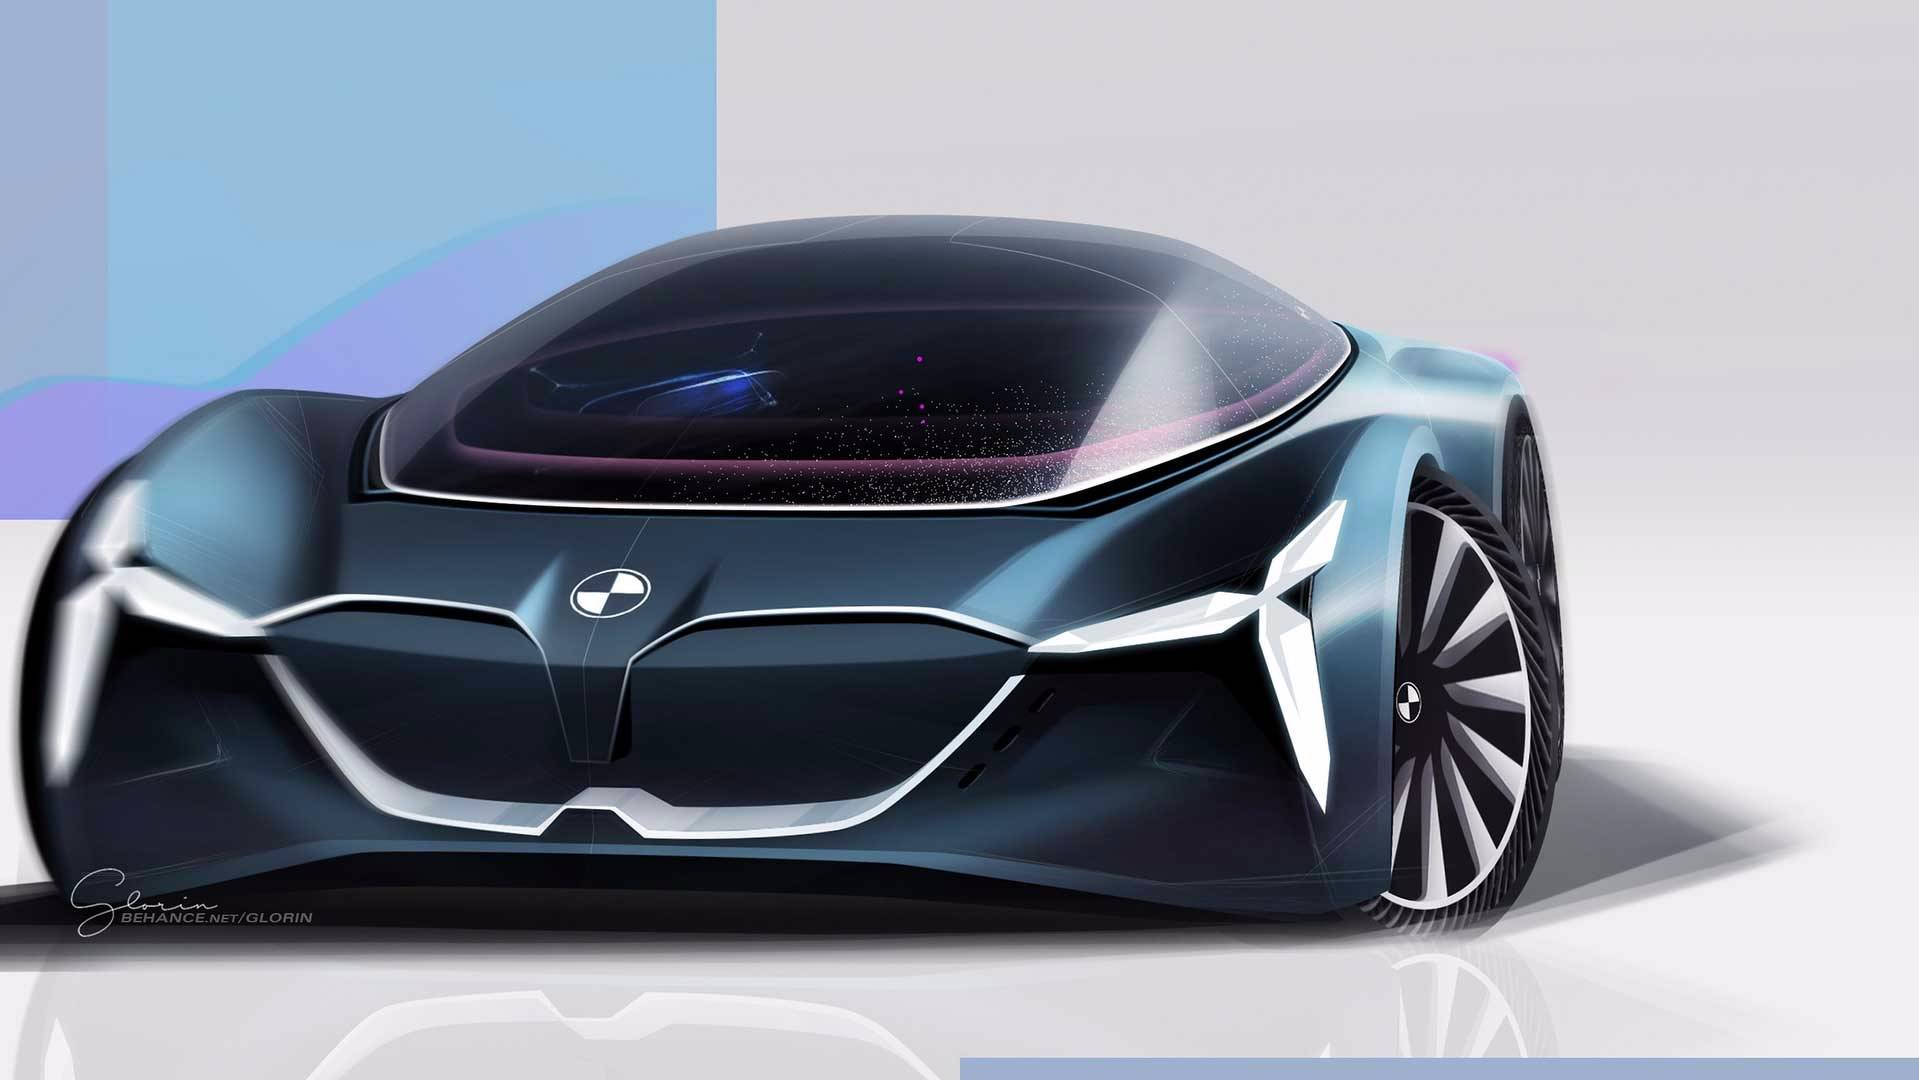 [Rendering] A Look Into the Future: BMW Vision Grand Tourer